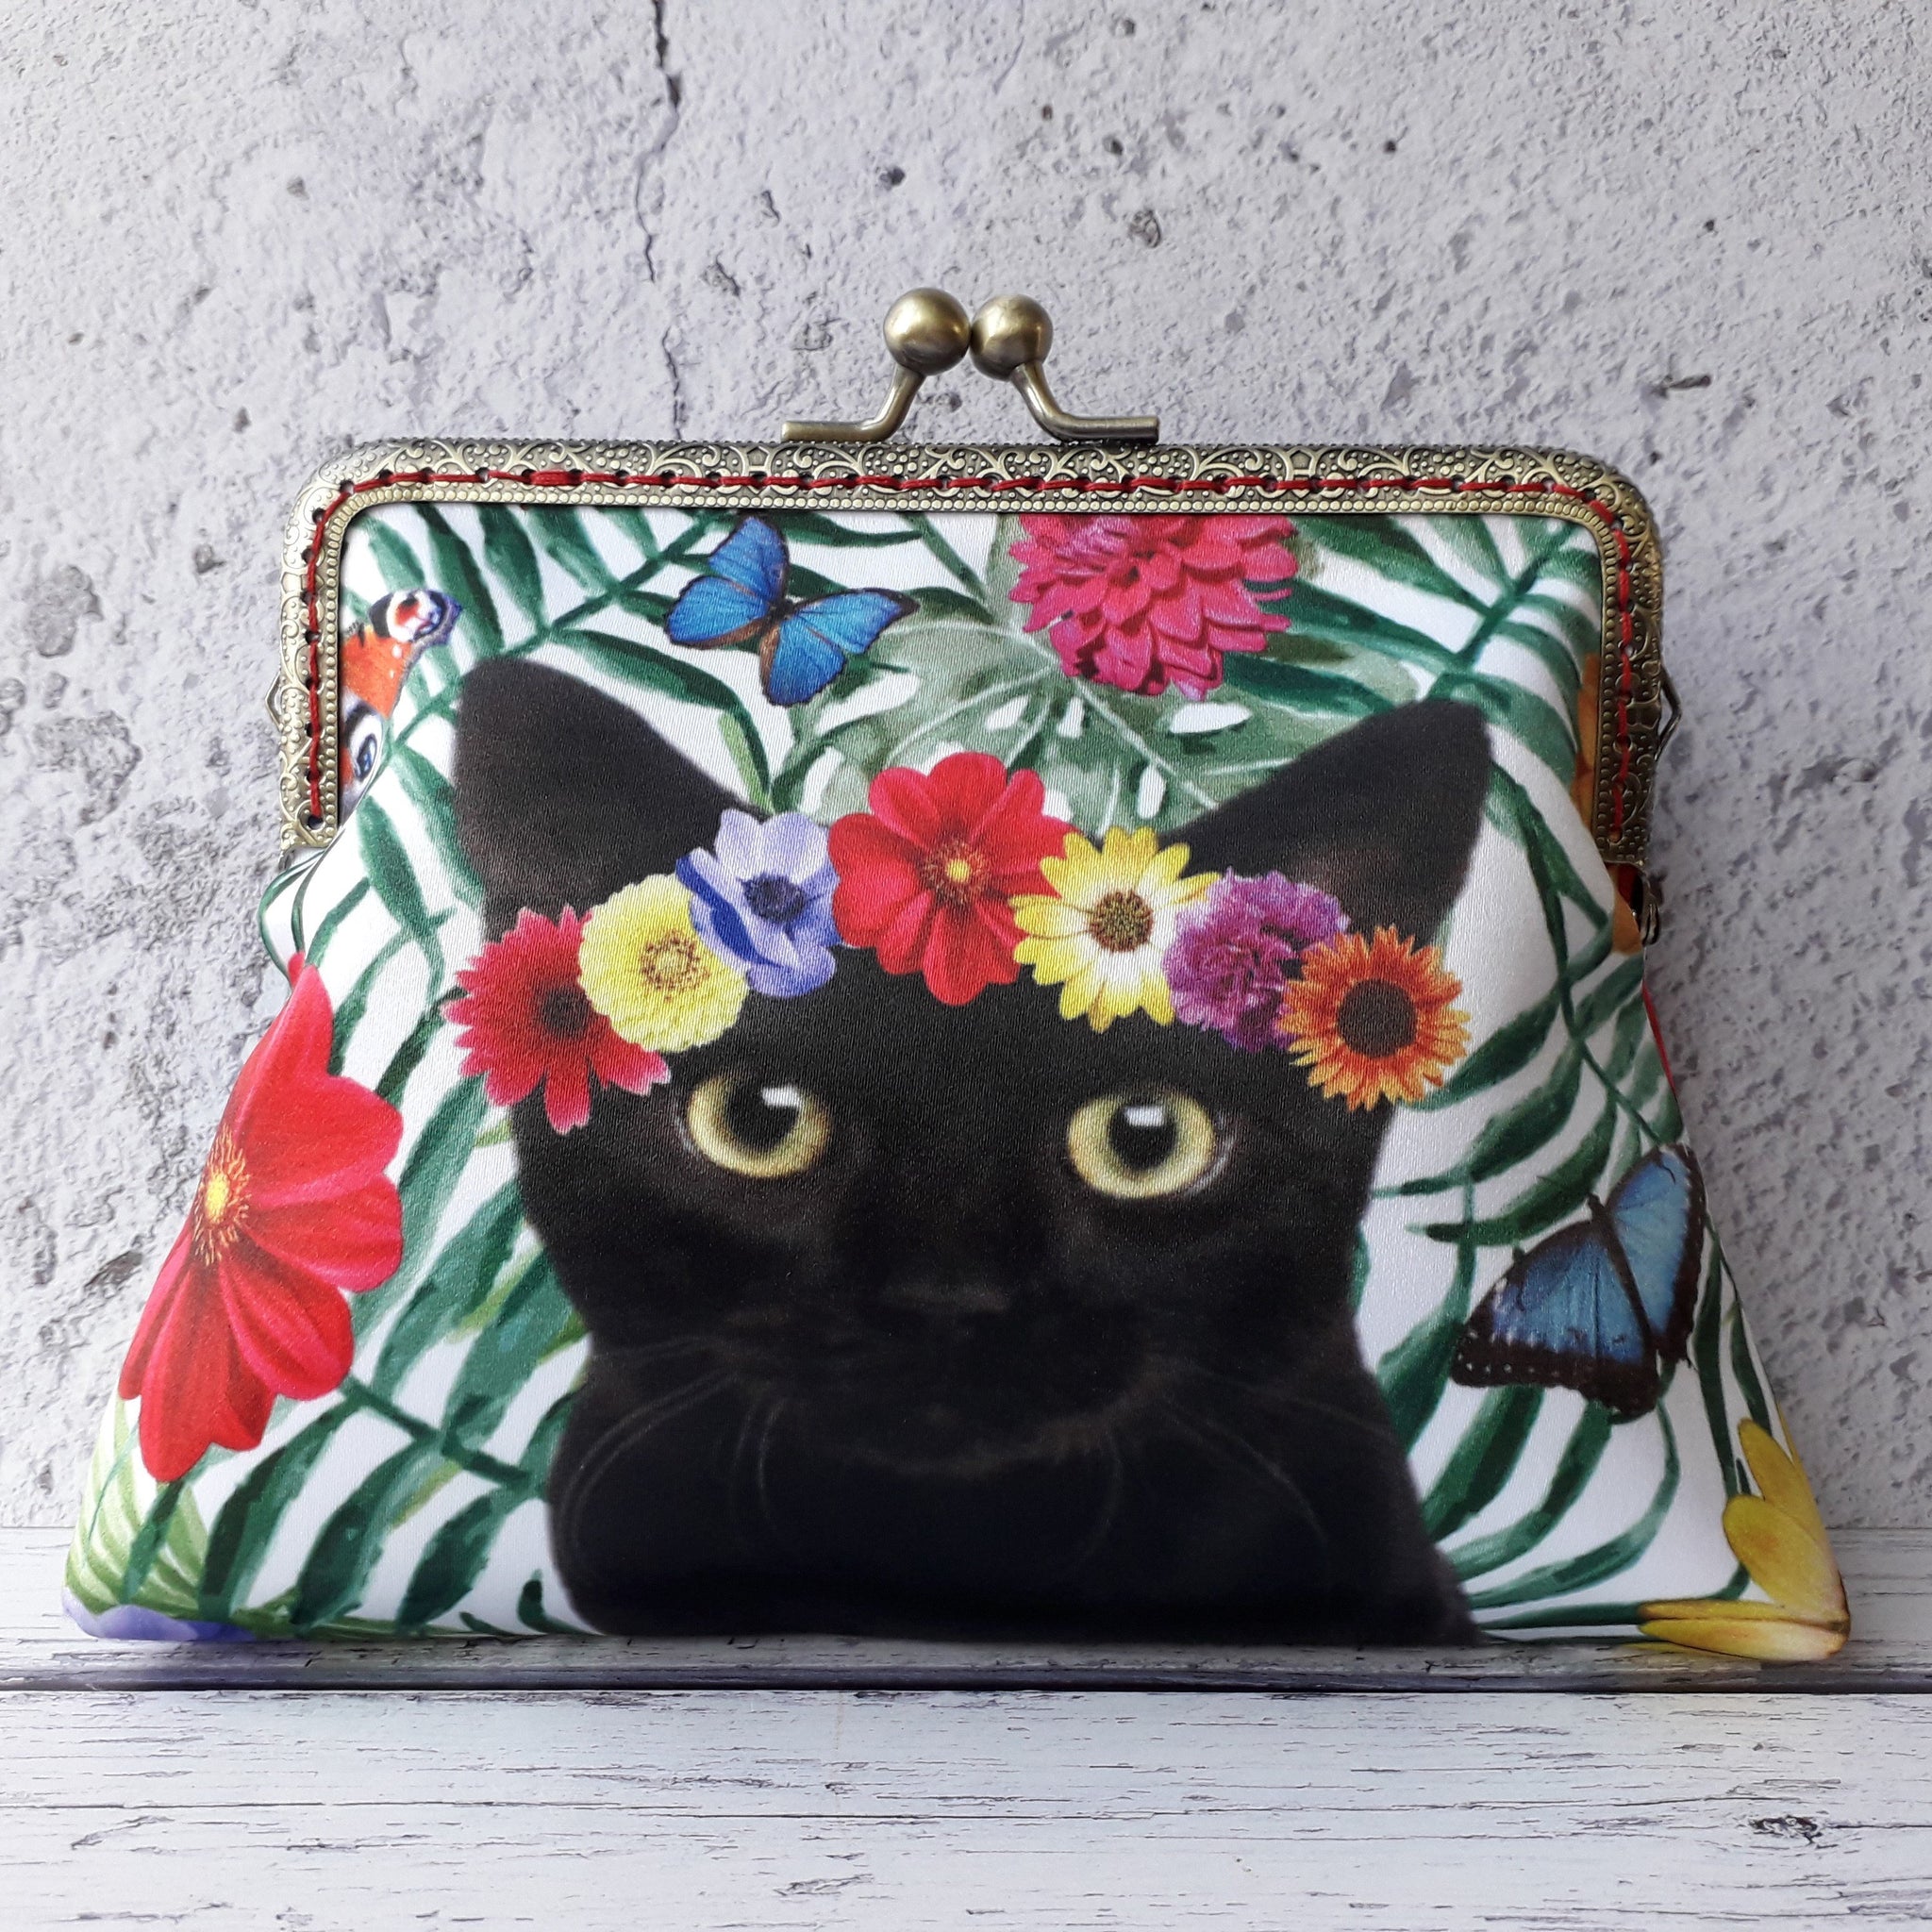 Tropical Floral Black Cat Satin Clutch Bag Purse Wedding Gift for Her 